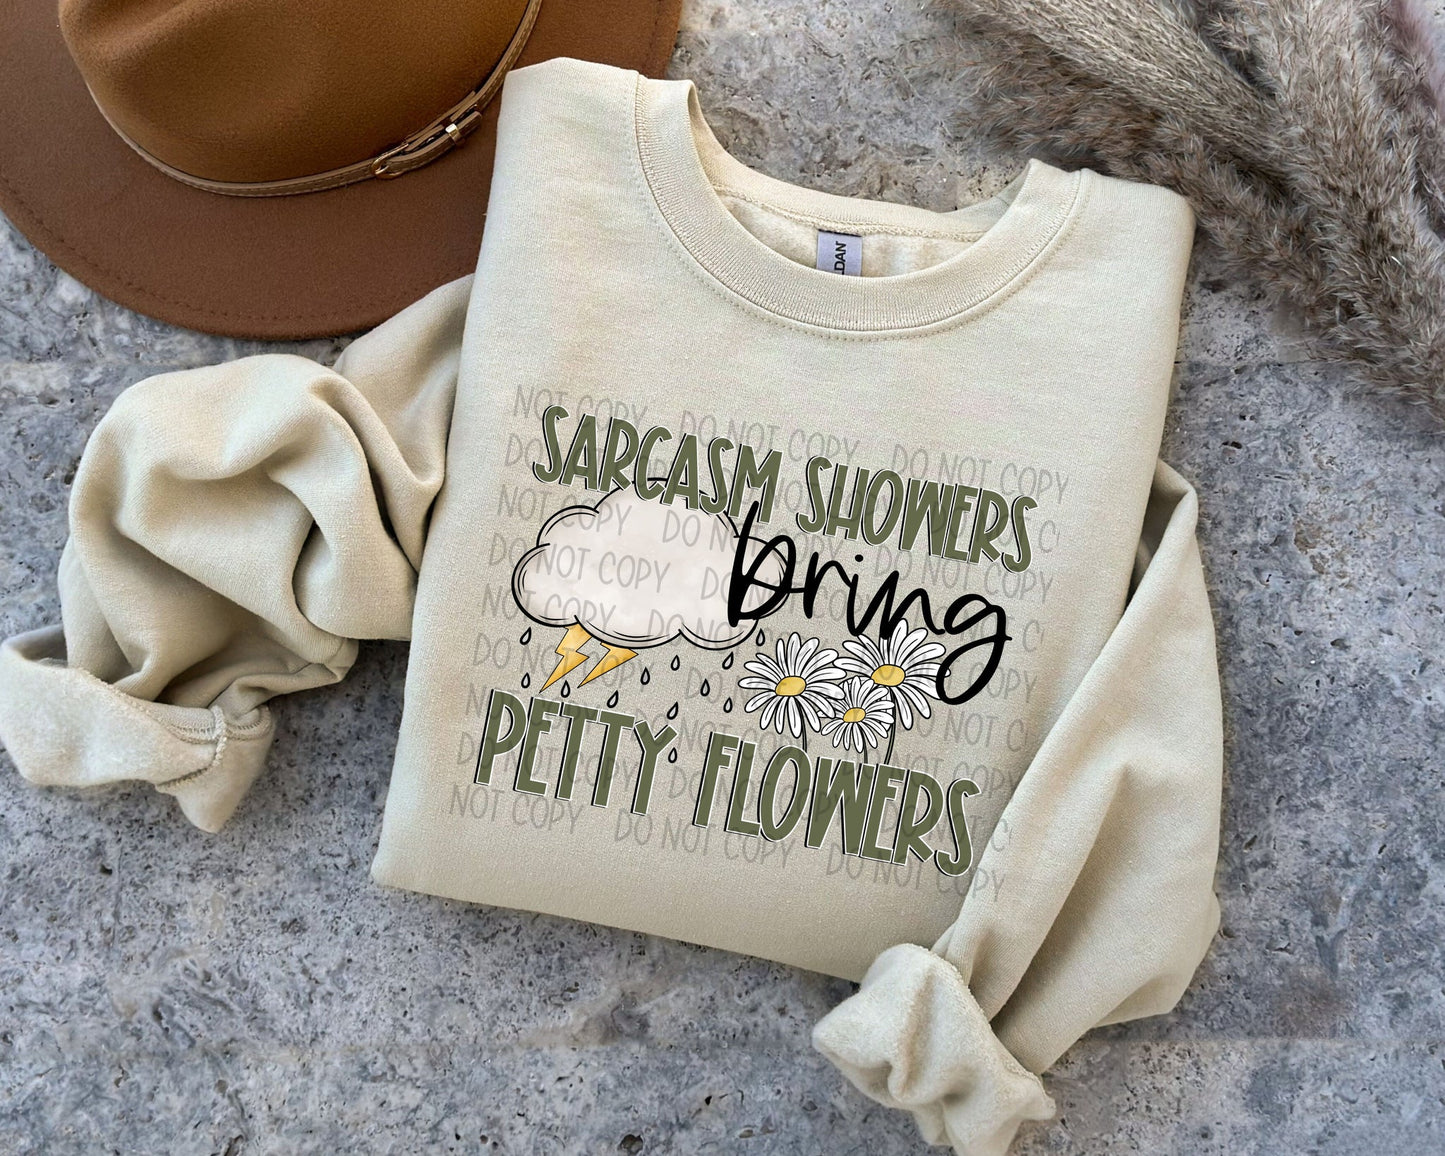 SARCASM SHOWERS BRING PETTY FLOWERS T-SHIRT OR PICK FROM 200 COLOR & STYLE OPTIONS! - TAT 4-7 DAYS